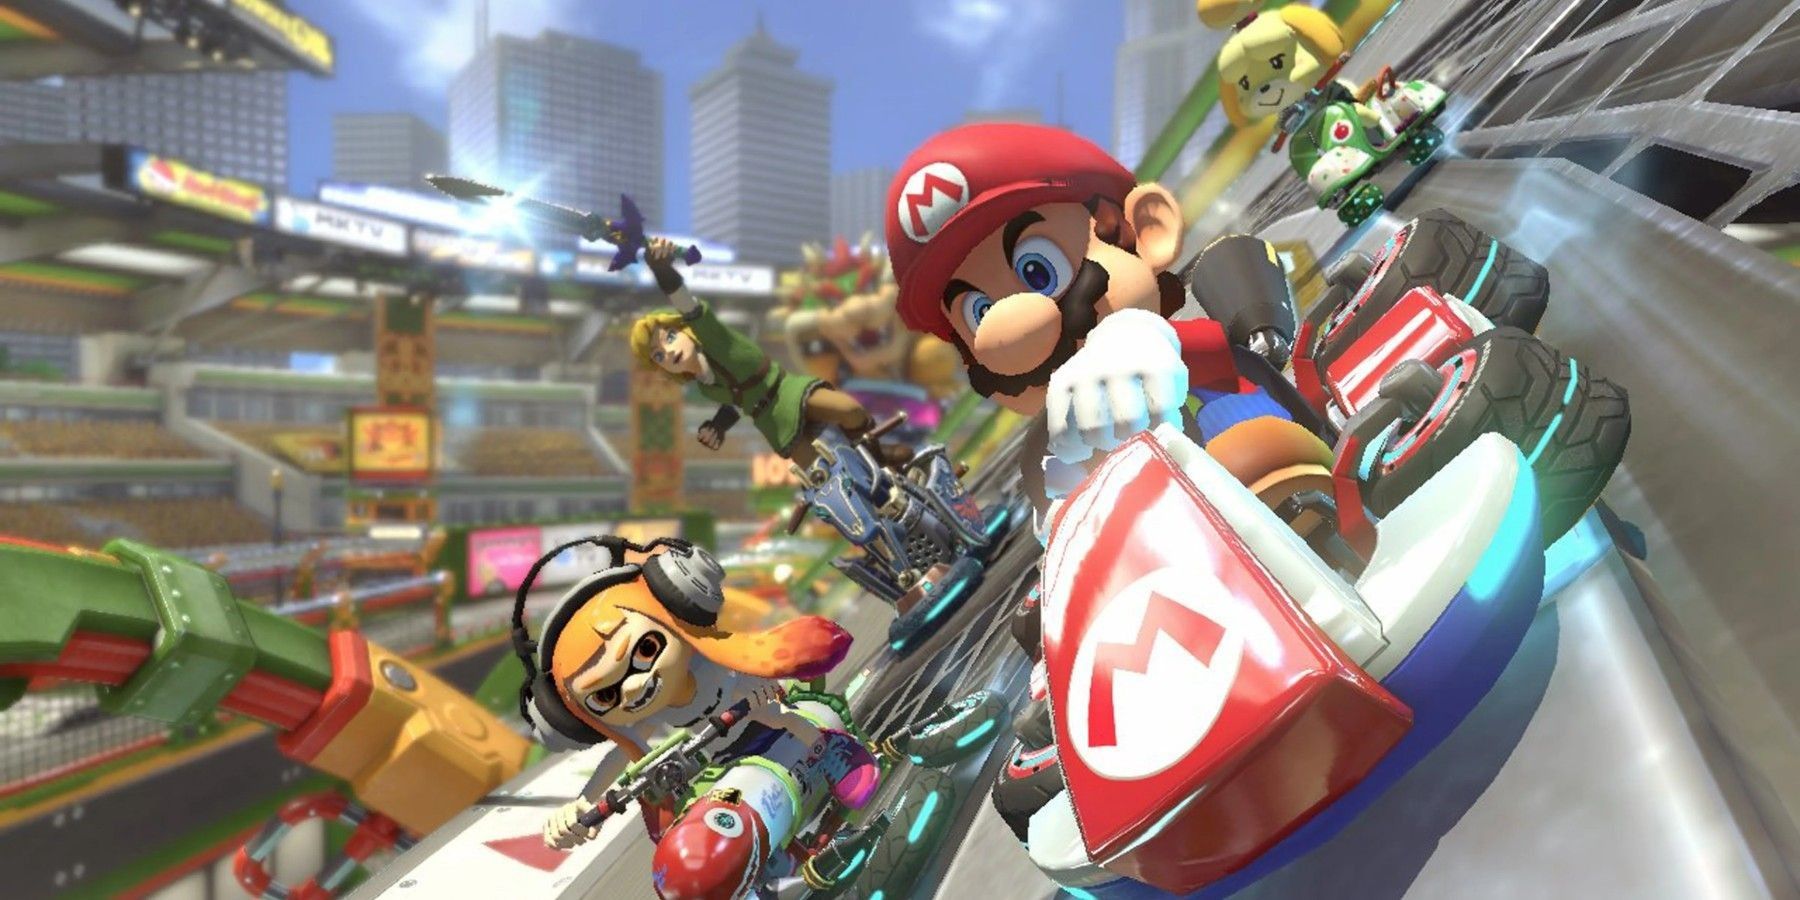 Mario Kart 8 Deluxe is Finally Letting Players Customize Items